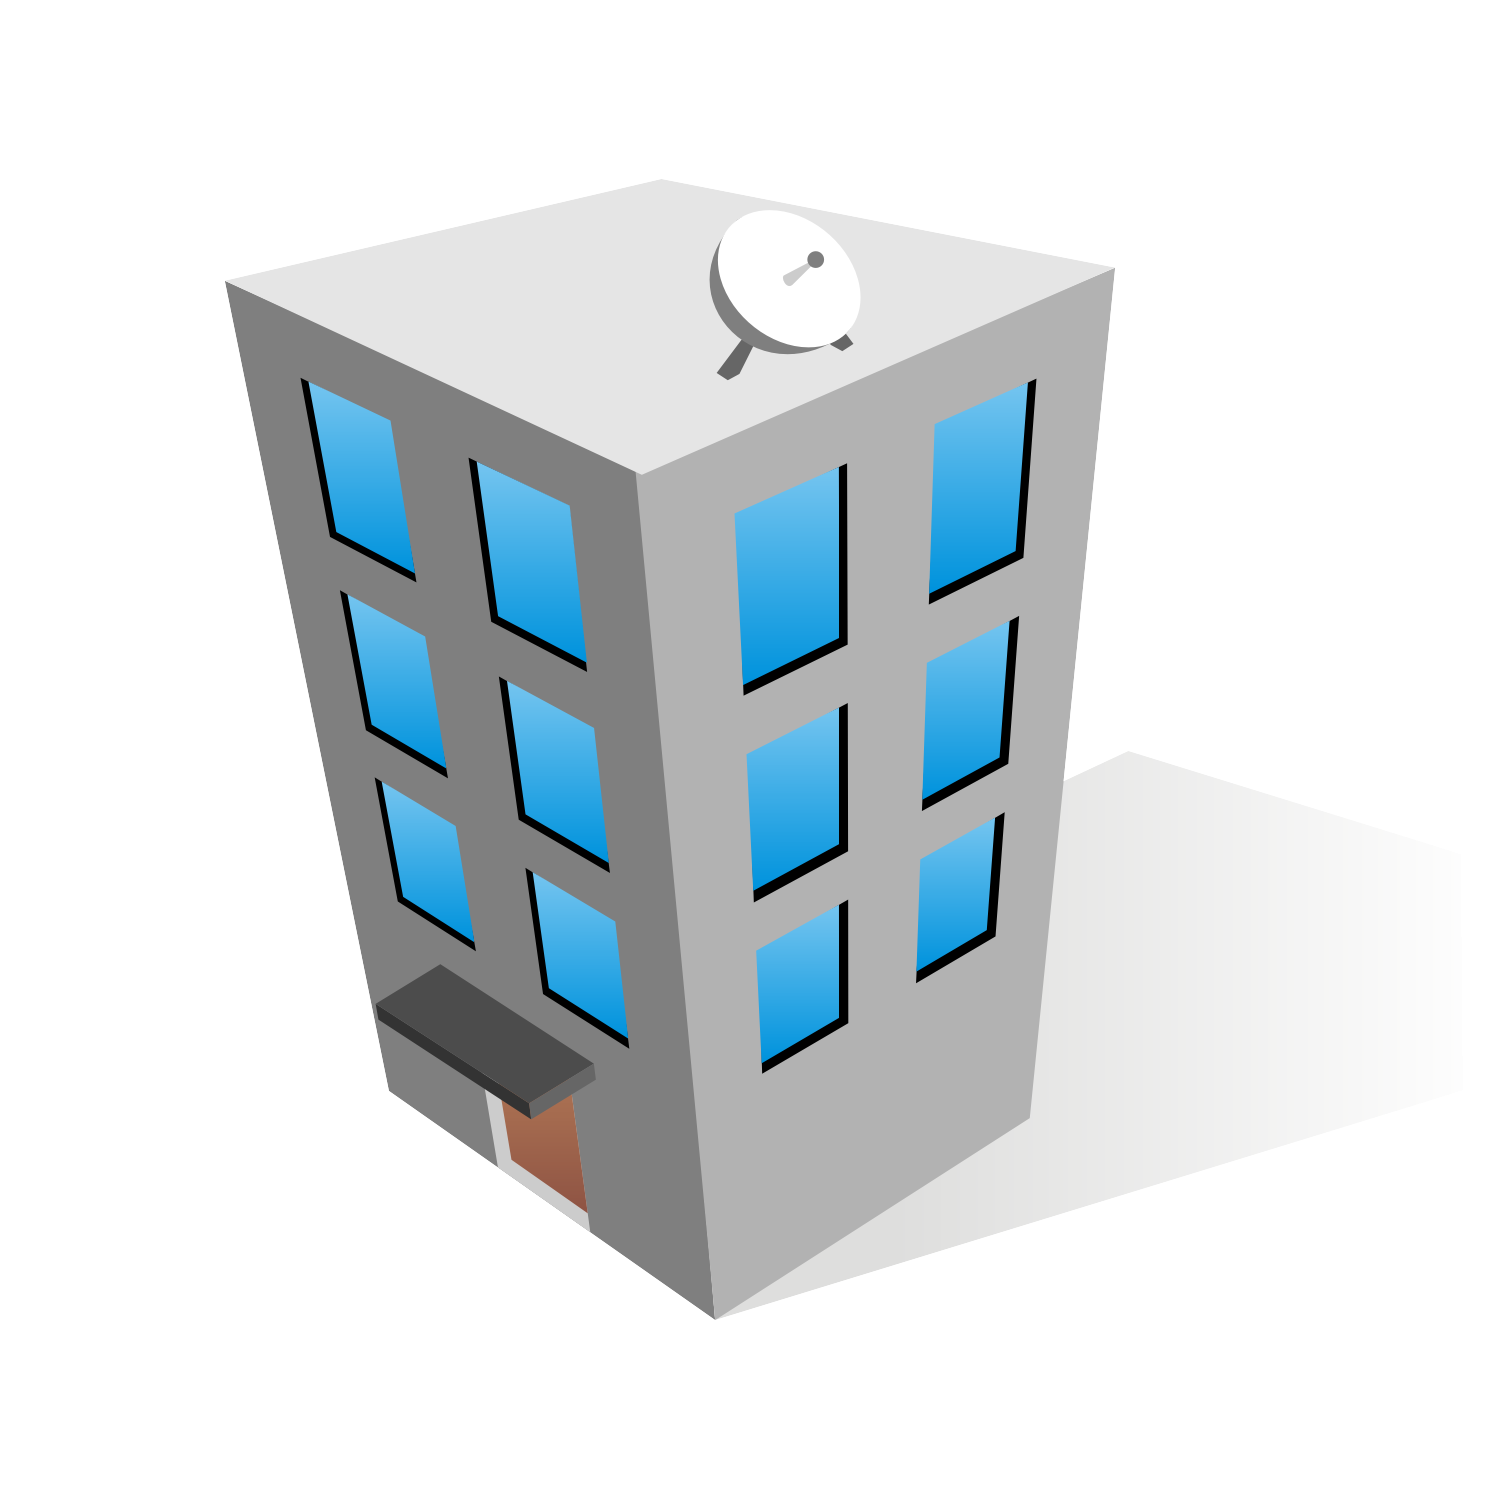 office building clipart icon